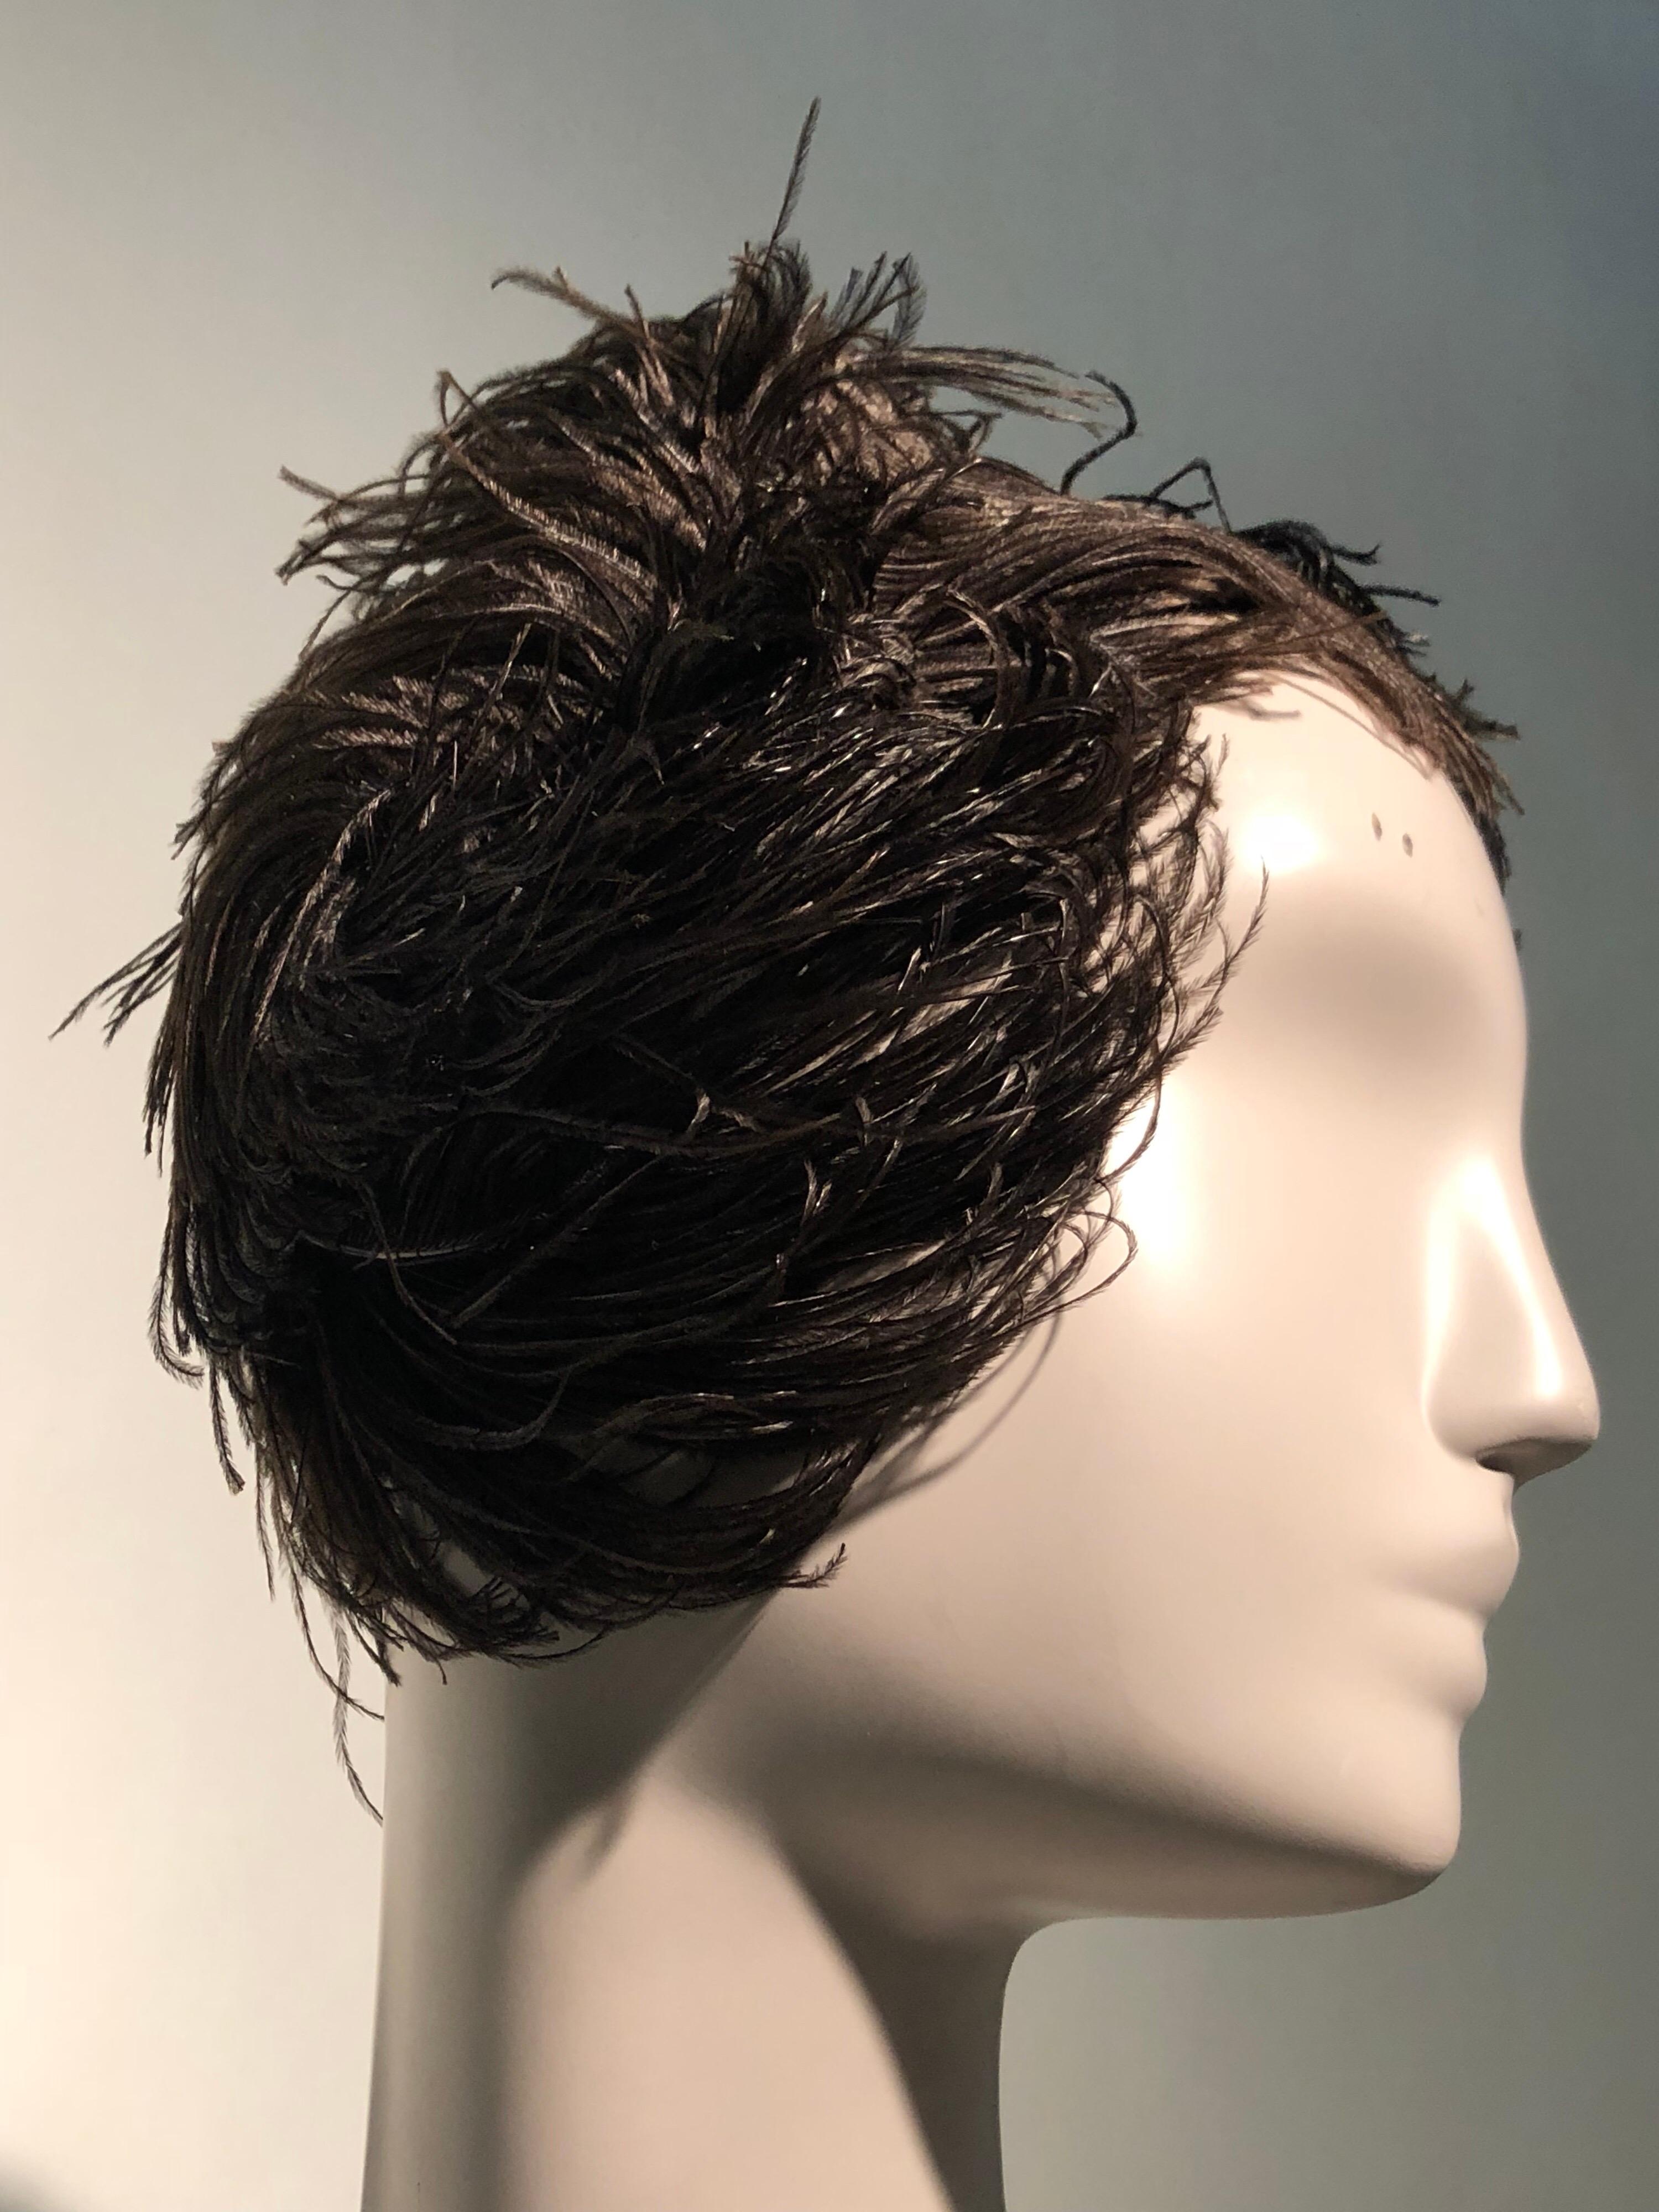 A beautiful 1950s Christian Dior ballet-inspired black ostrich feather cocktail hat that swirls around the head dramatically. Rather wig-like at the back of the head and at neckline. Worn toward crown.